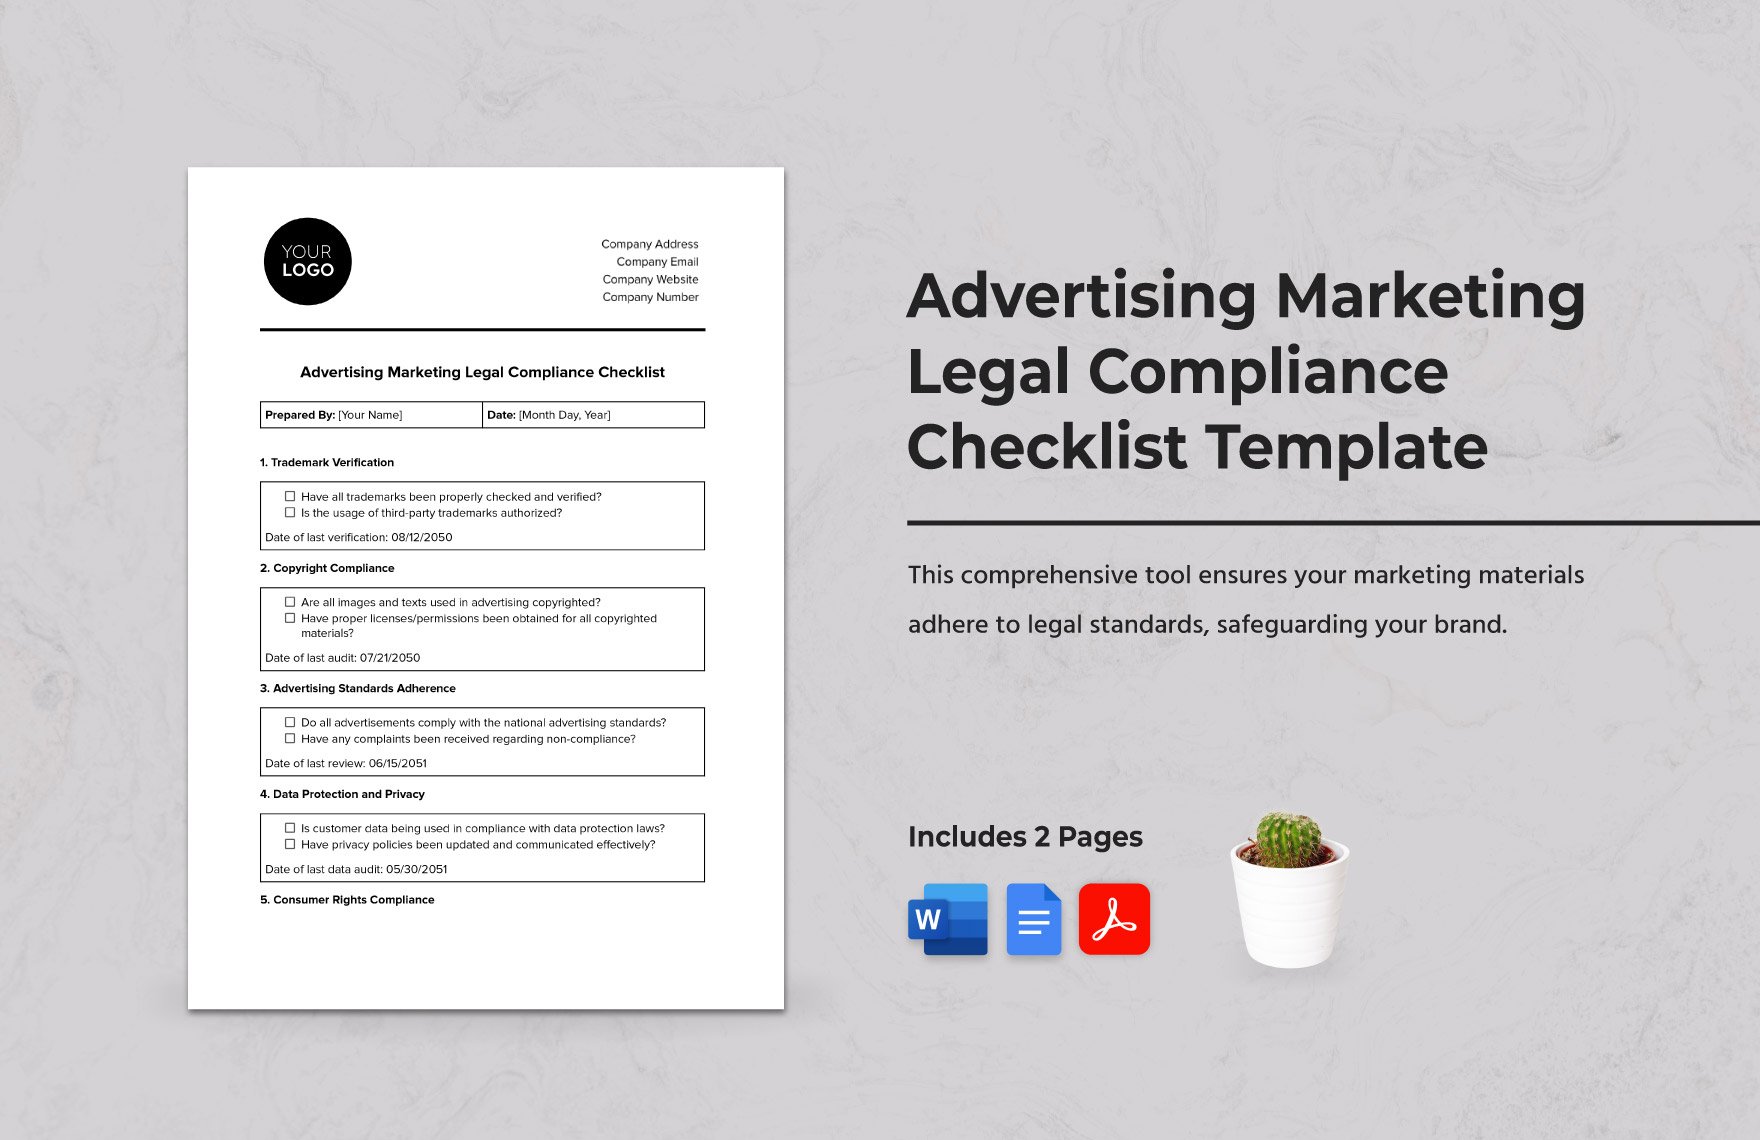 Advertising Marketing Legal Compliance Checklist Template in Word, Google Docs, PDF